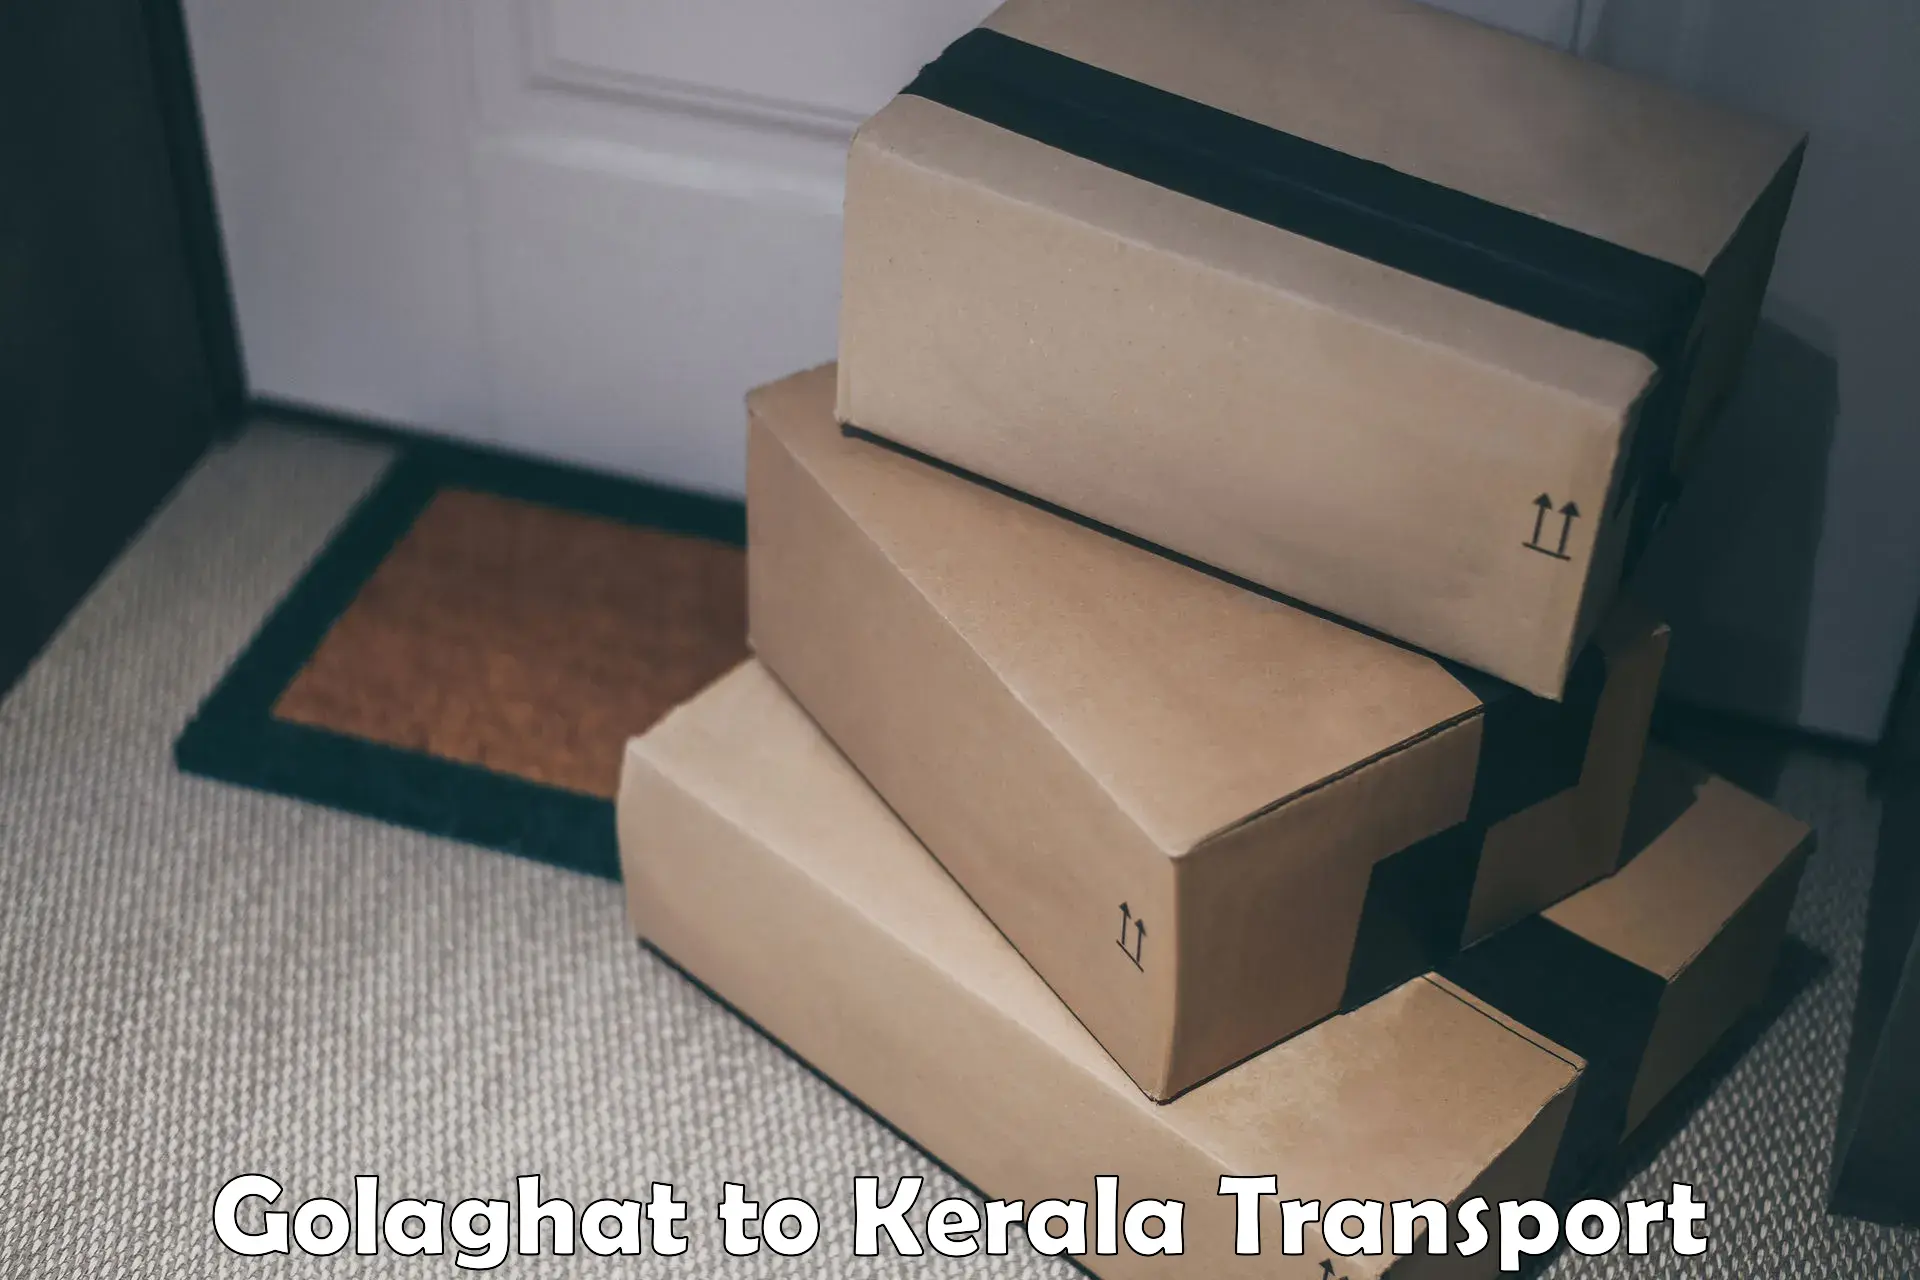 Commercial transport service Golaghat to Karunagappally